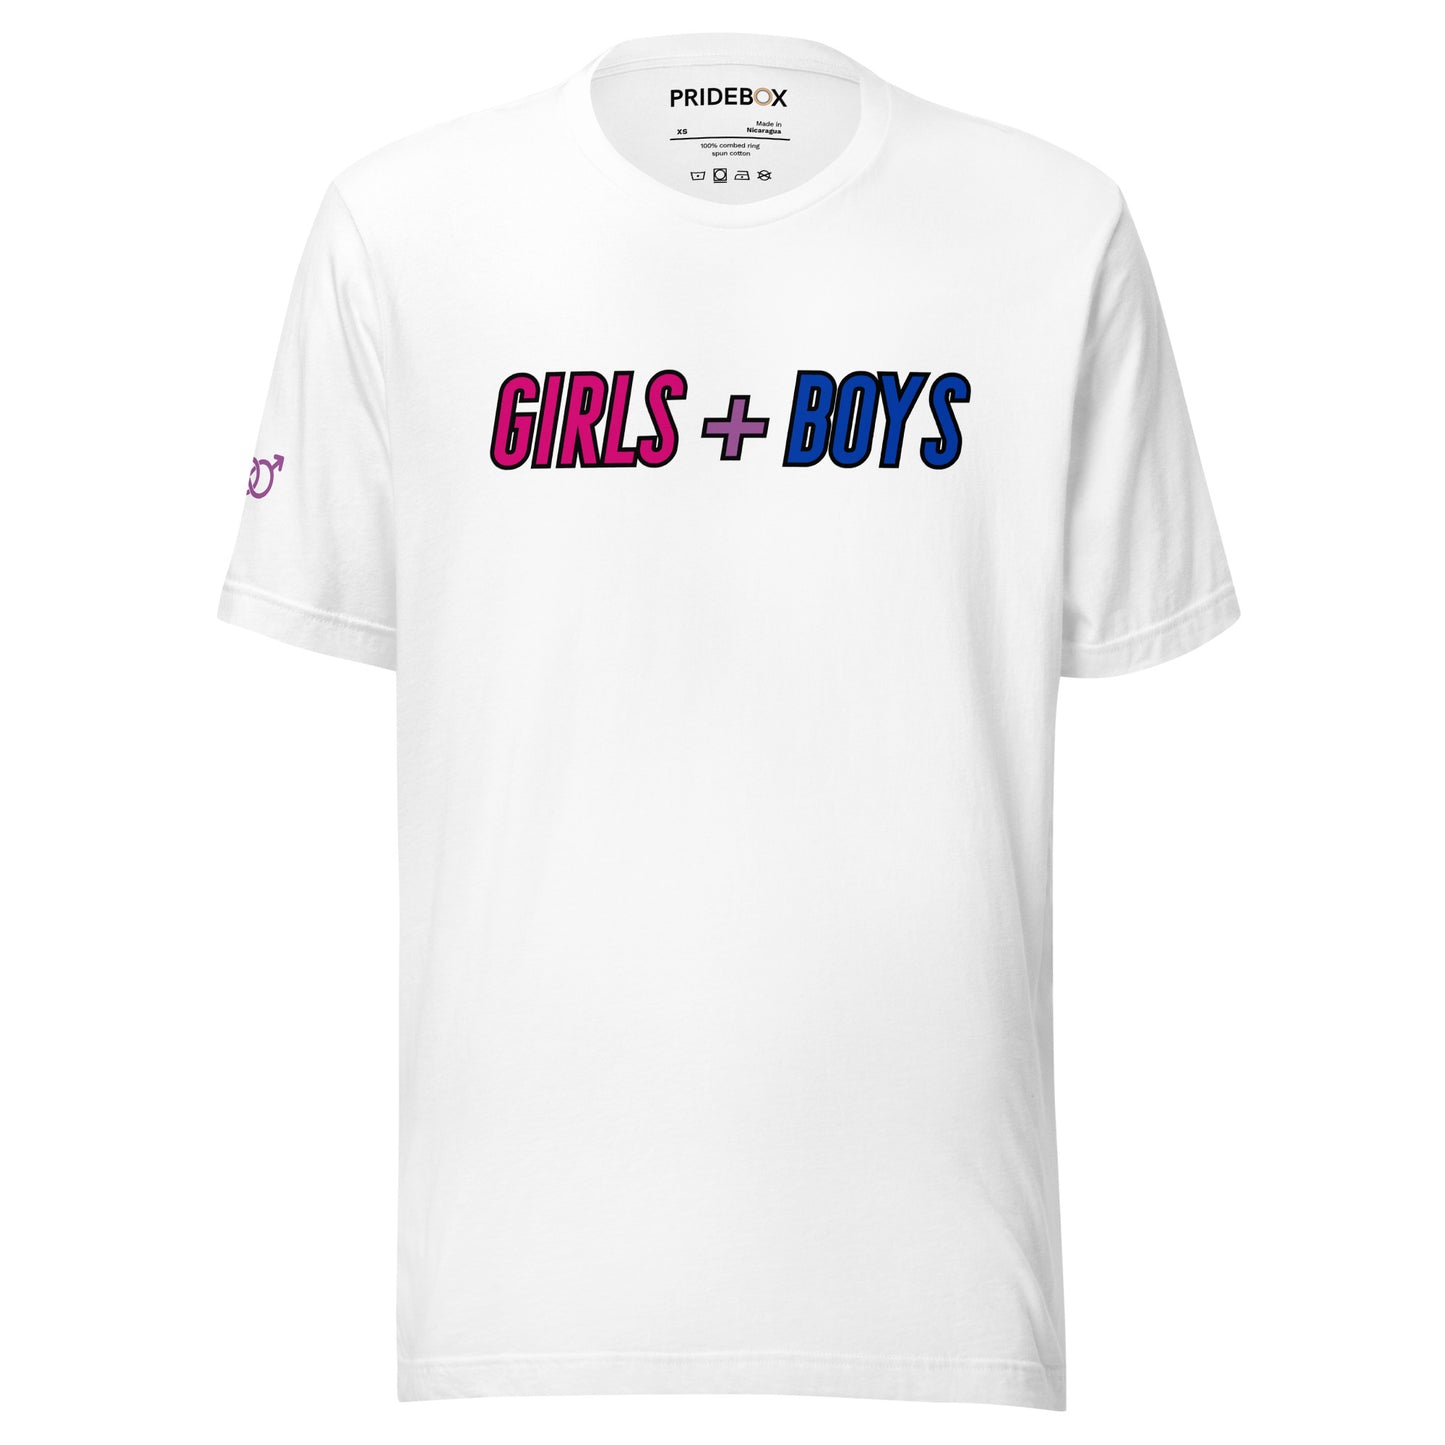 Bisexual Pride Girls and Boys Unisex t-shirt